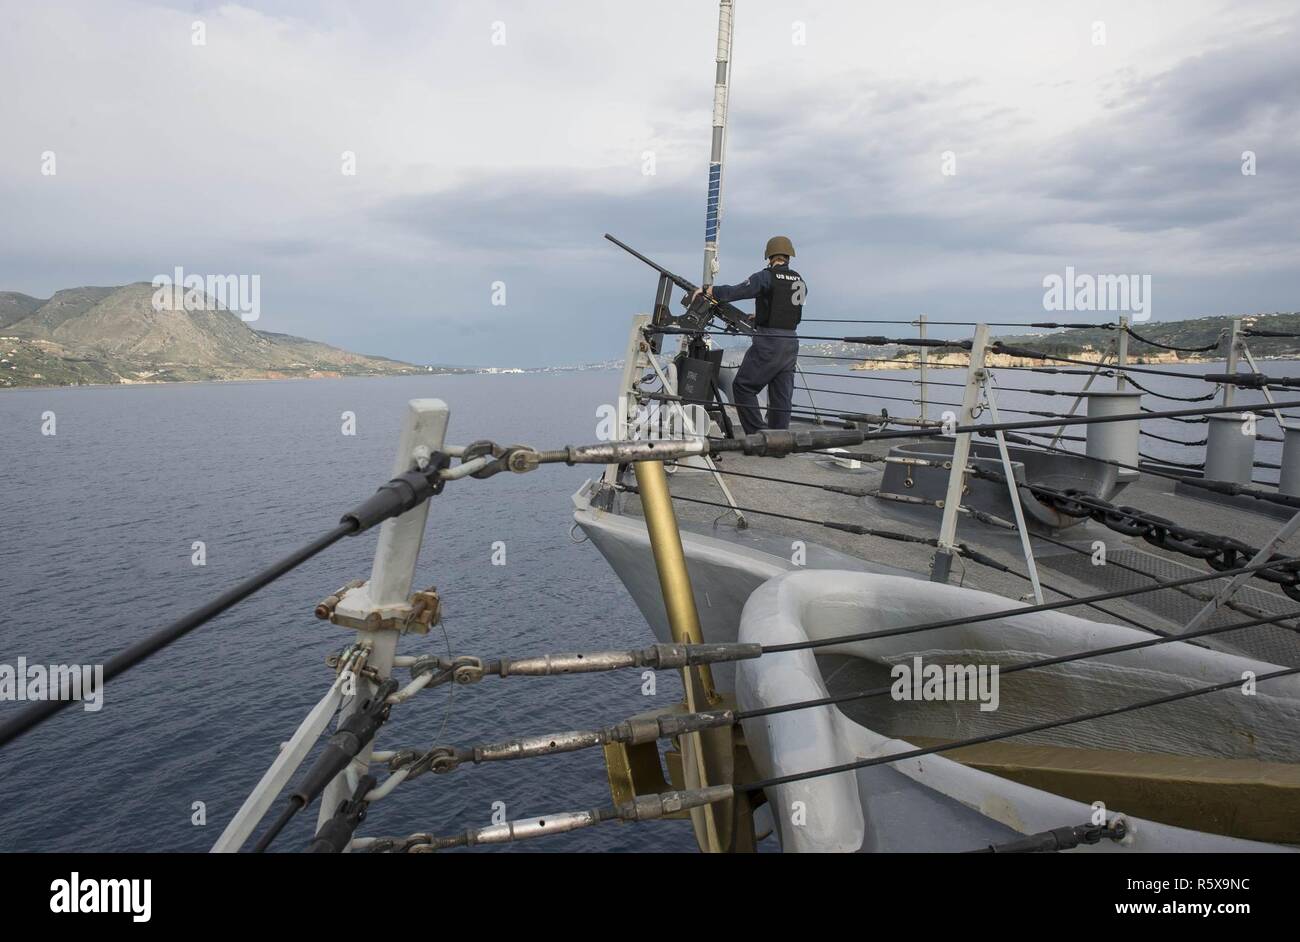 SOUDA BAY, Greece (April 17, 2017) Information Systems Technician 3rd Class Ryan Guerra, from Philadelphia, mans a .50-caliber machine gun aboard USS Ross (DDG 71) as the ship arrives in Souda Bay, Greece for a scheduled port- visit April 17, 2017. USS Ross, an Arleigh Burke-class guided-missile destroyer, forward-deployed to Rota, Spain, is conducting naval operations in the U.S. 6th Fleet area of operations in support of U.S. national security interests in Europe and Africa. Stock Photo